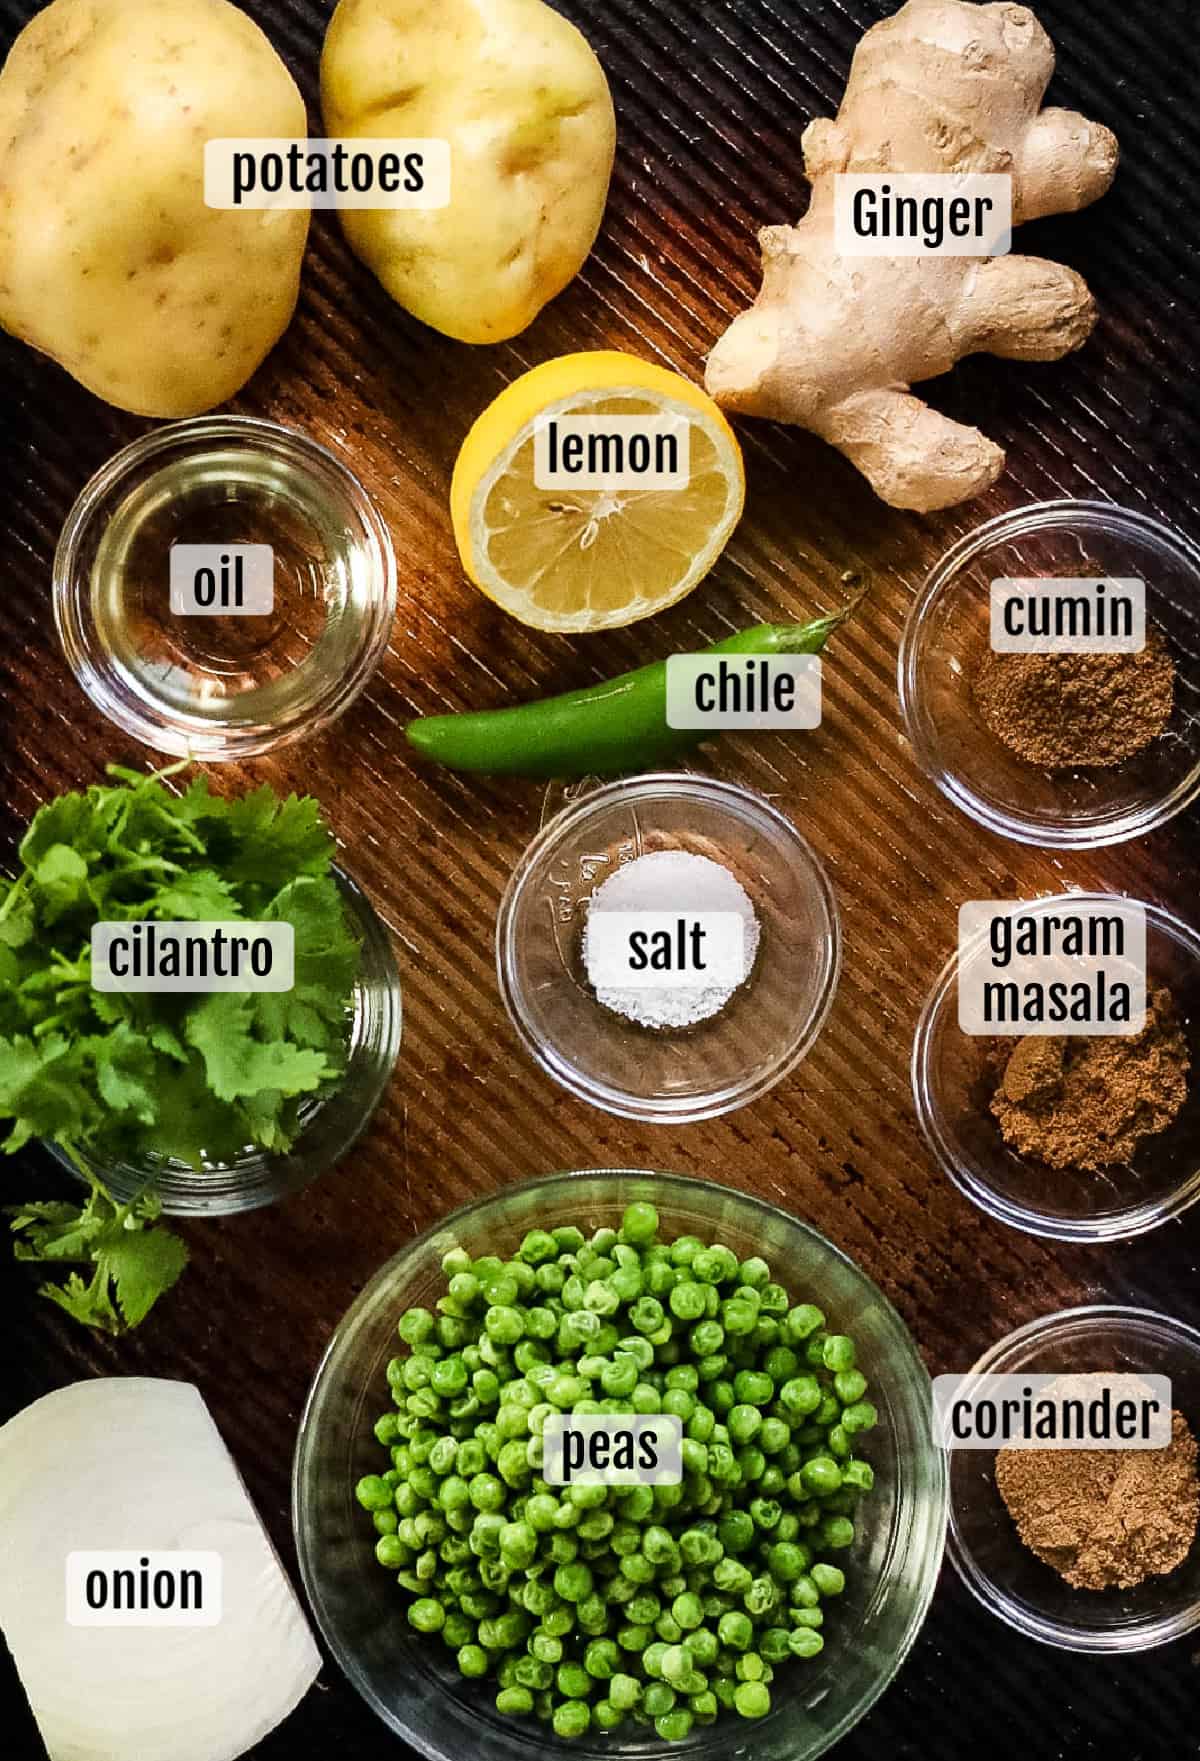 Overhead shot of the ingredients needed to make the samosa filling.